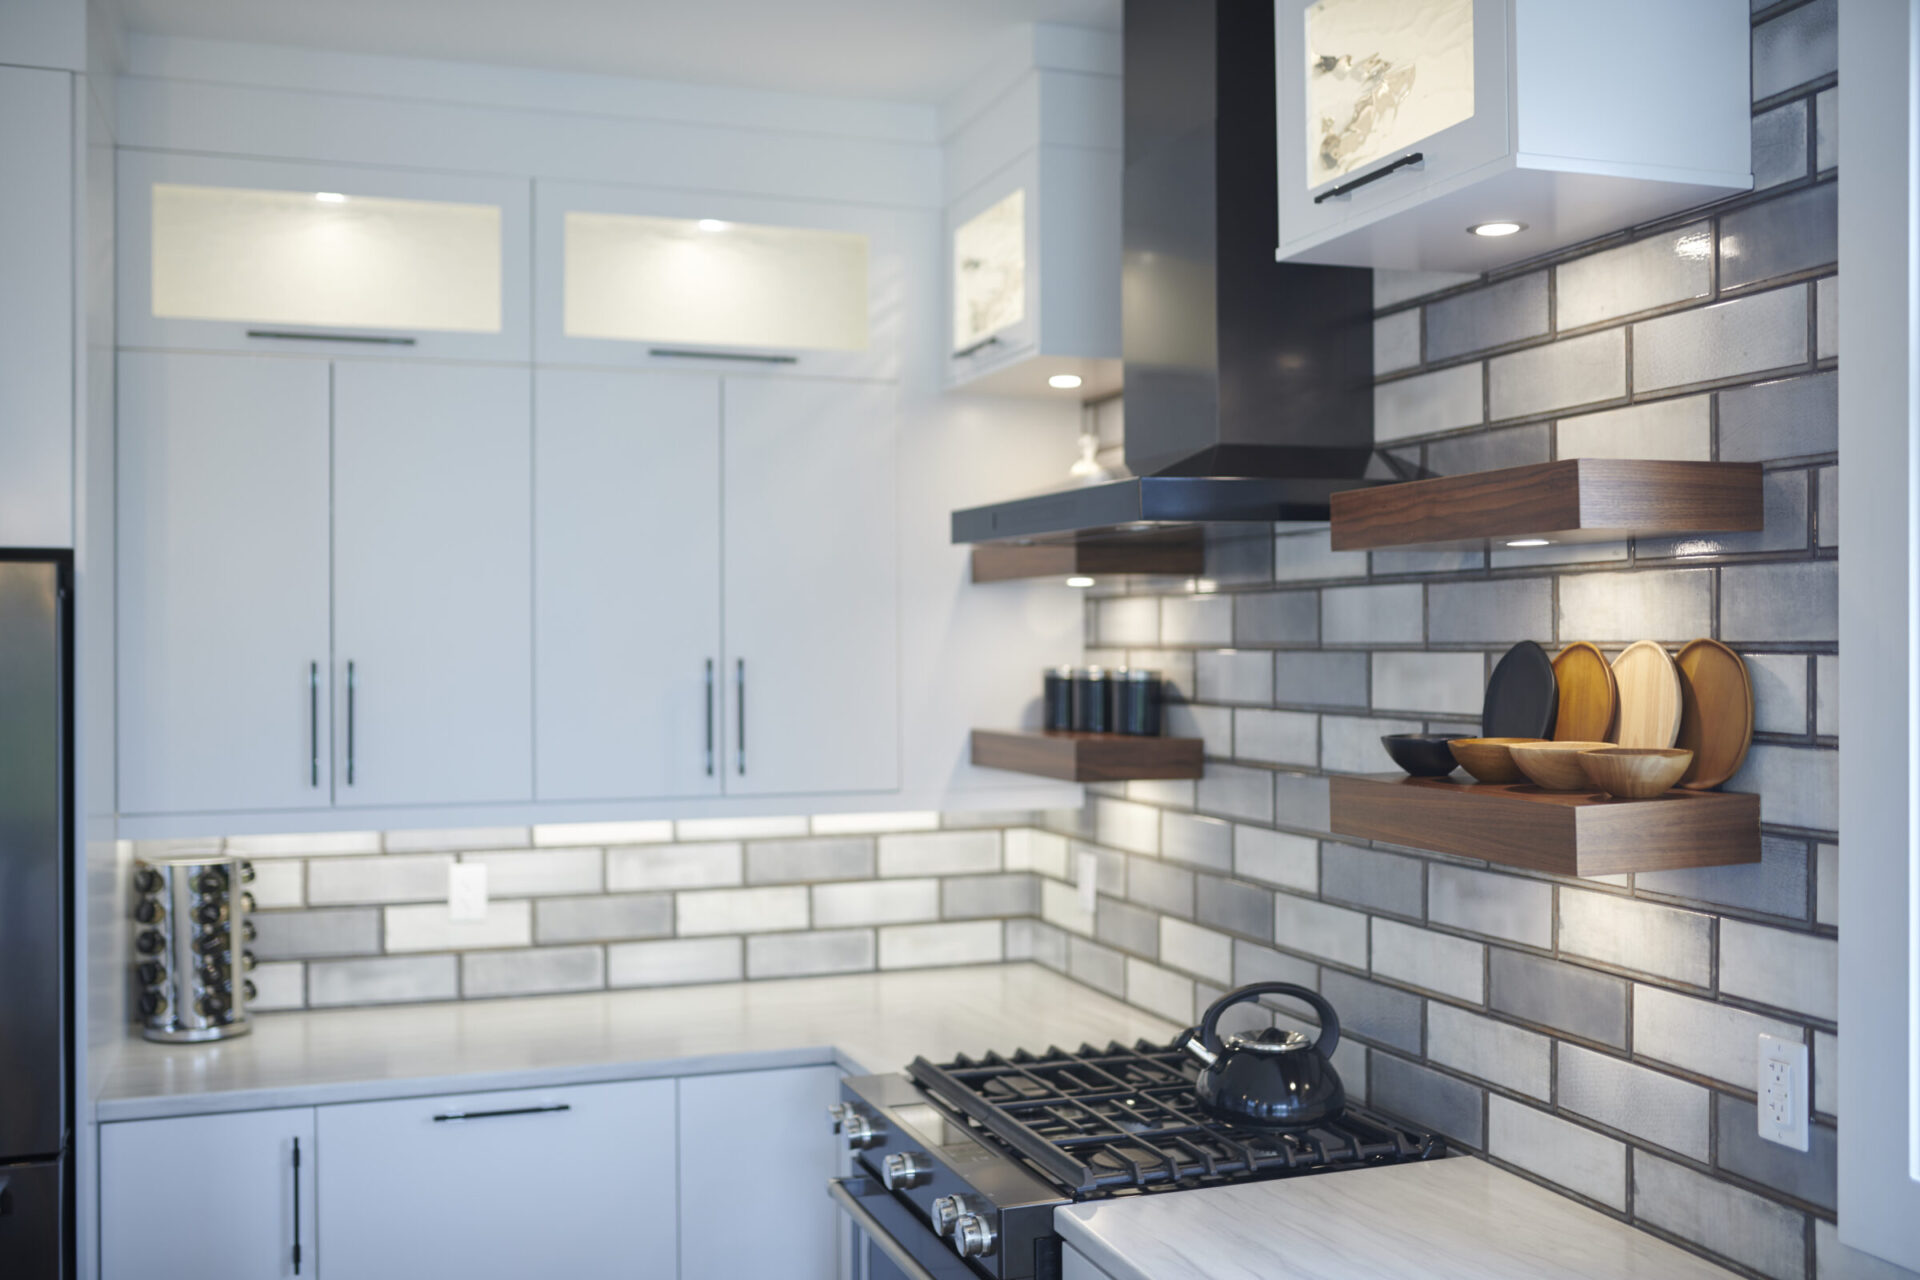 A modern kitchen interior with white cabinetry, floating wooden shelves, a gas stove, subway tiles backsplash, and a teapot on the countertop.